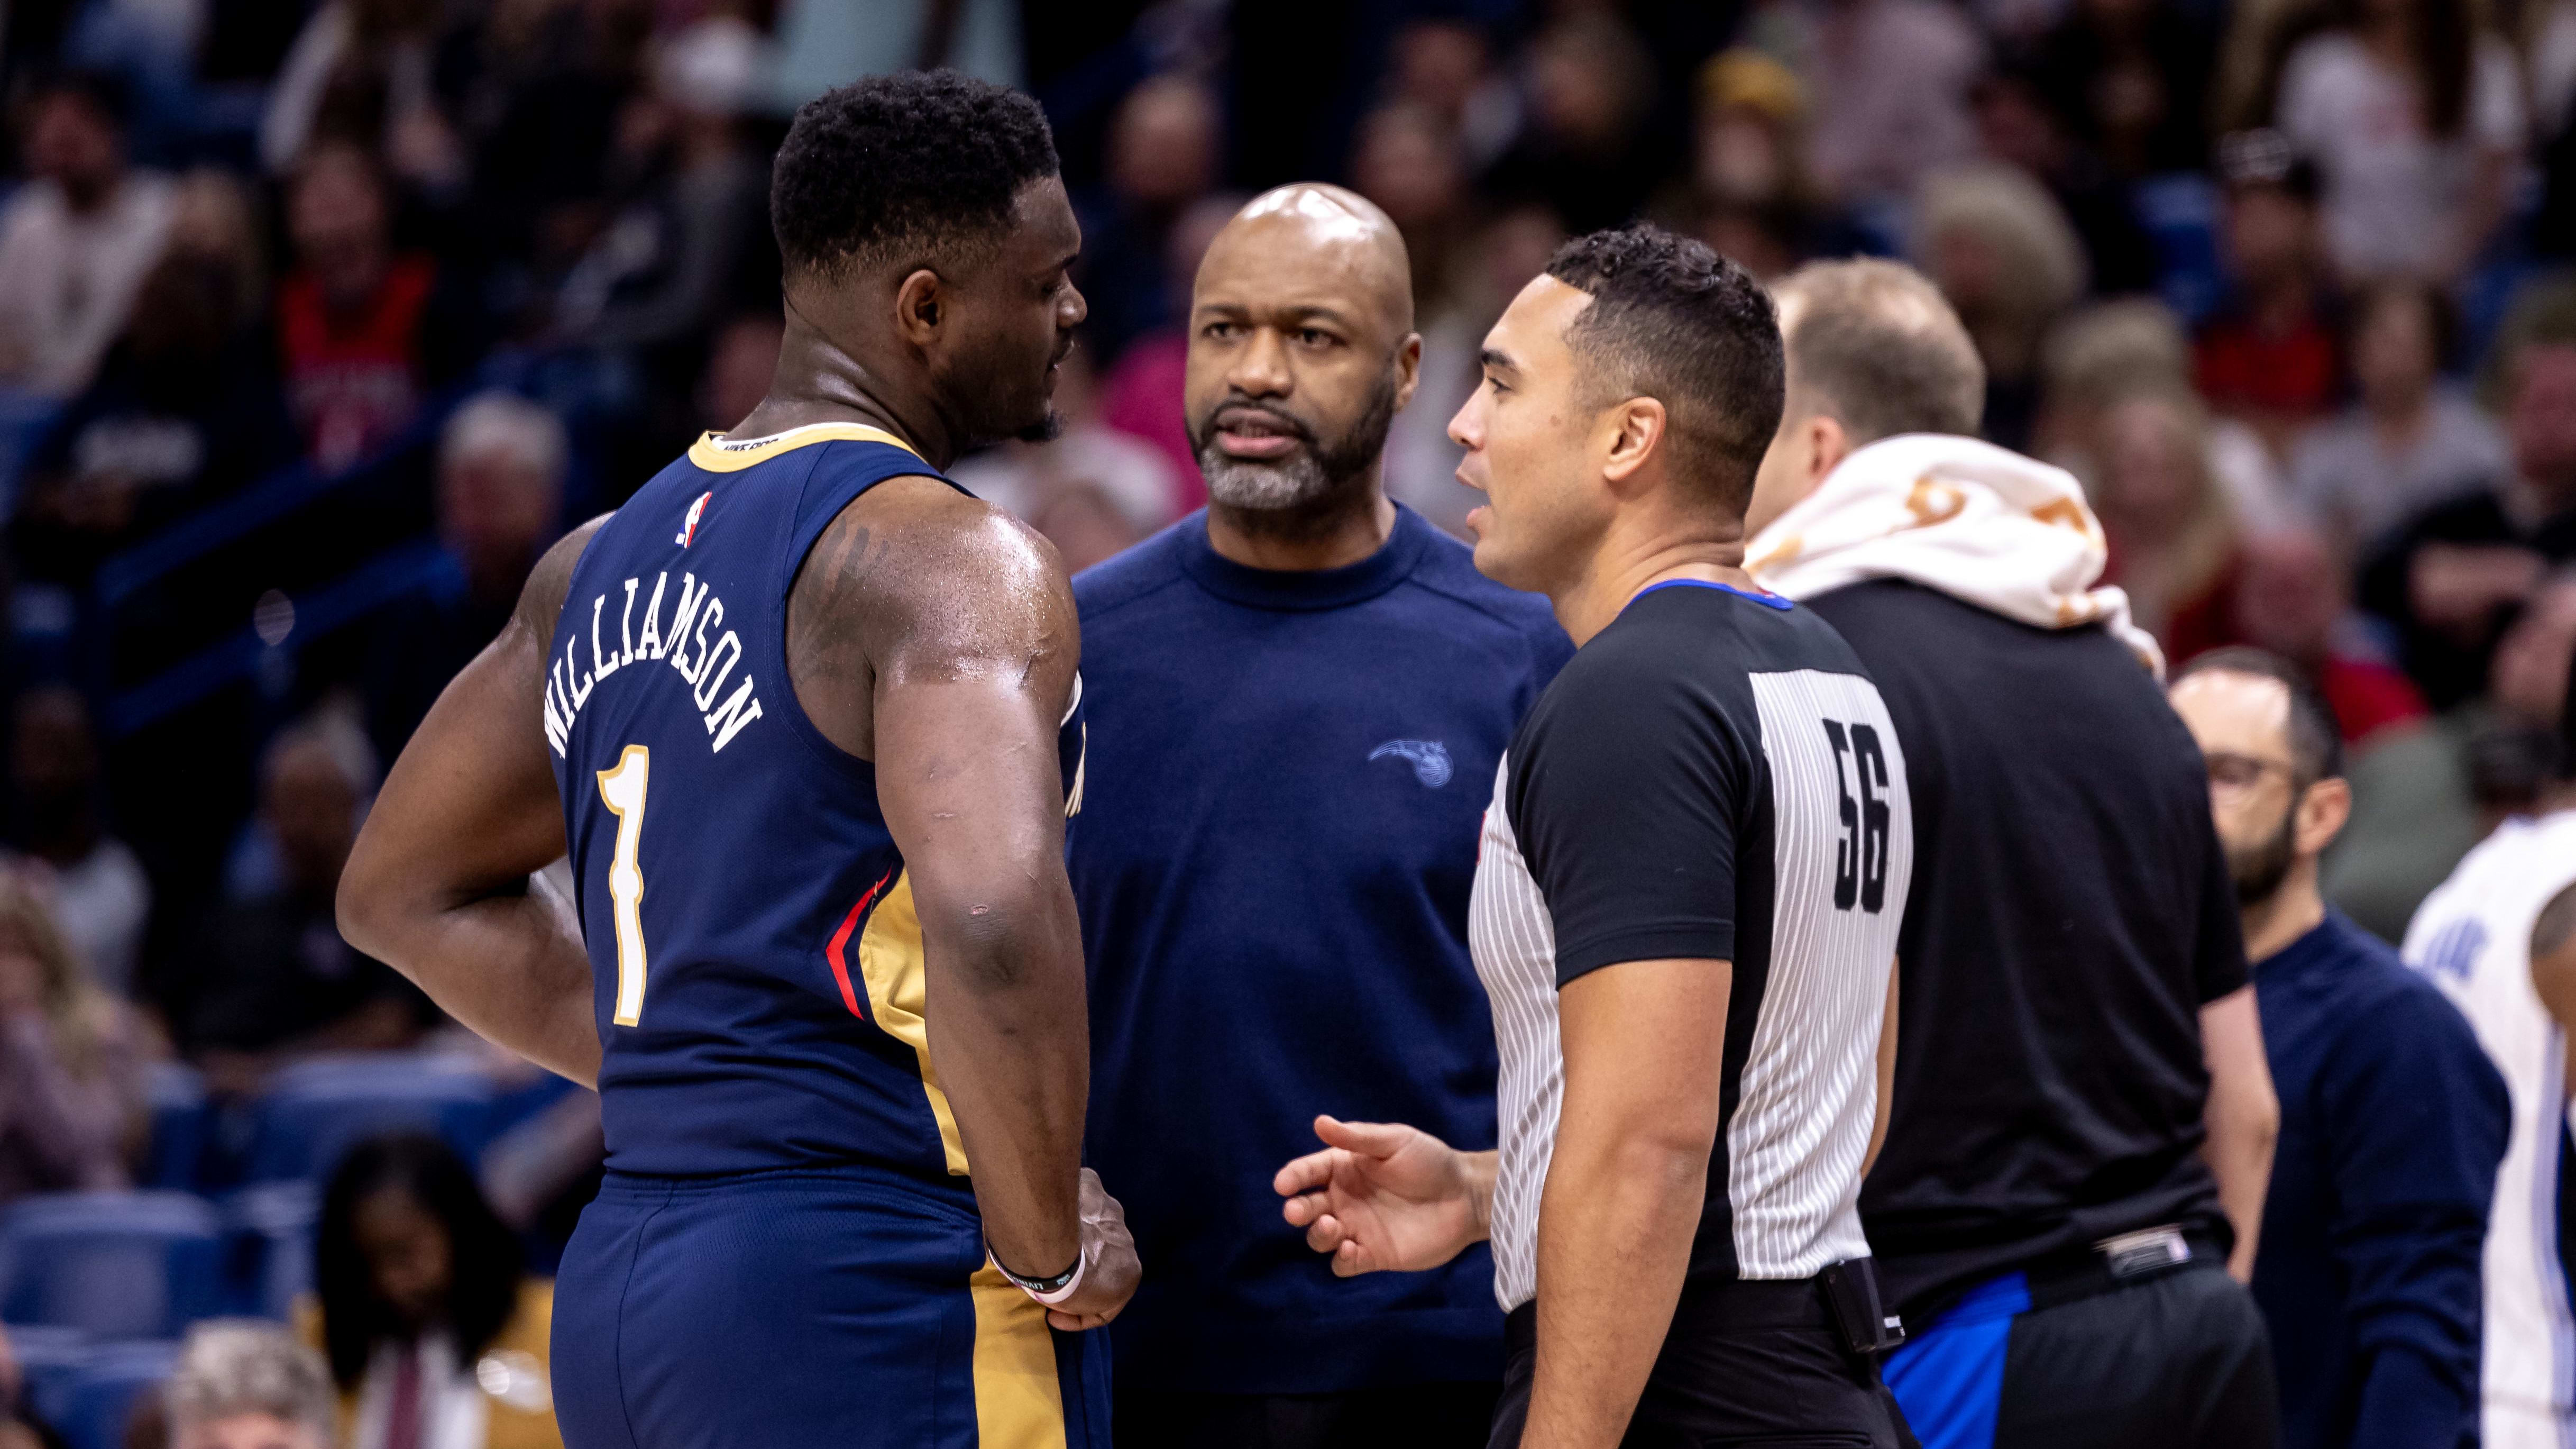 Zion Williamson argues a referees call during the game with the Orlando Magic.